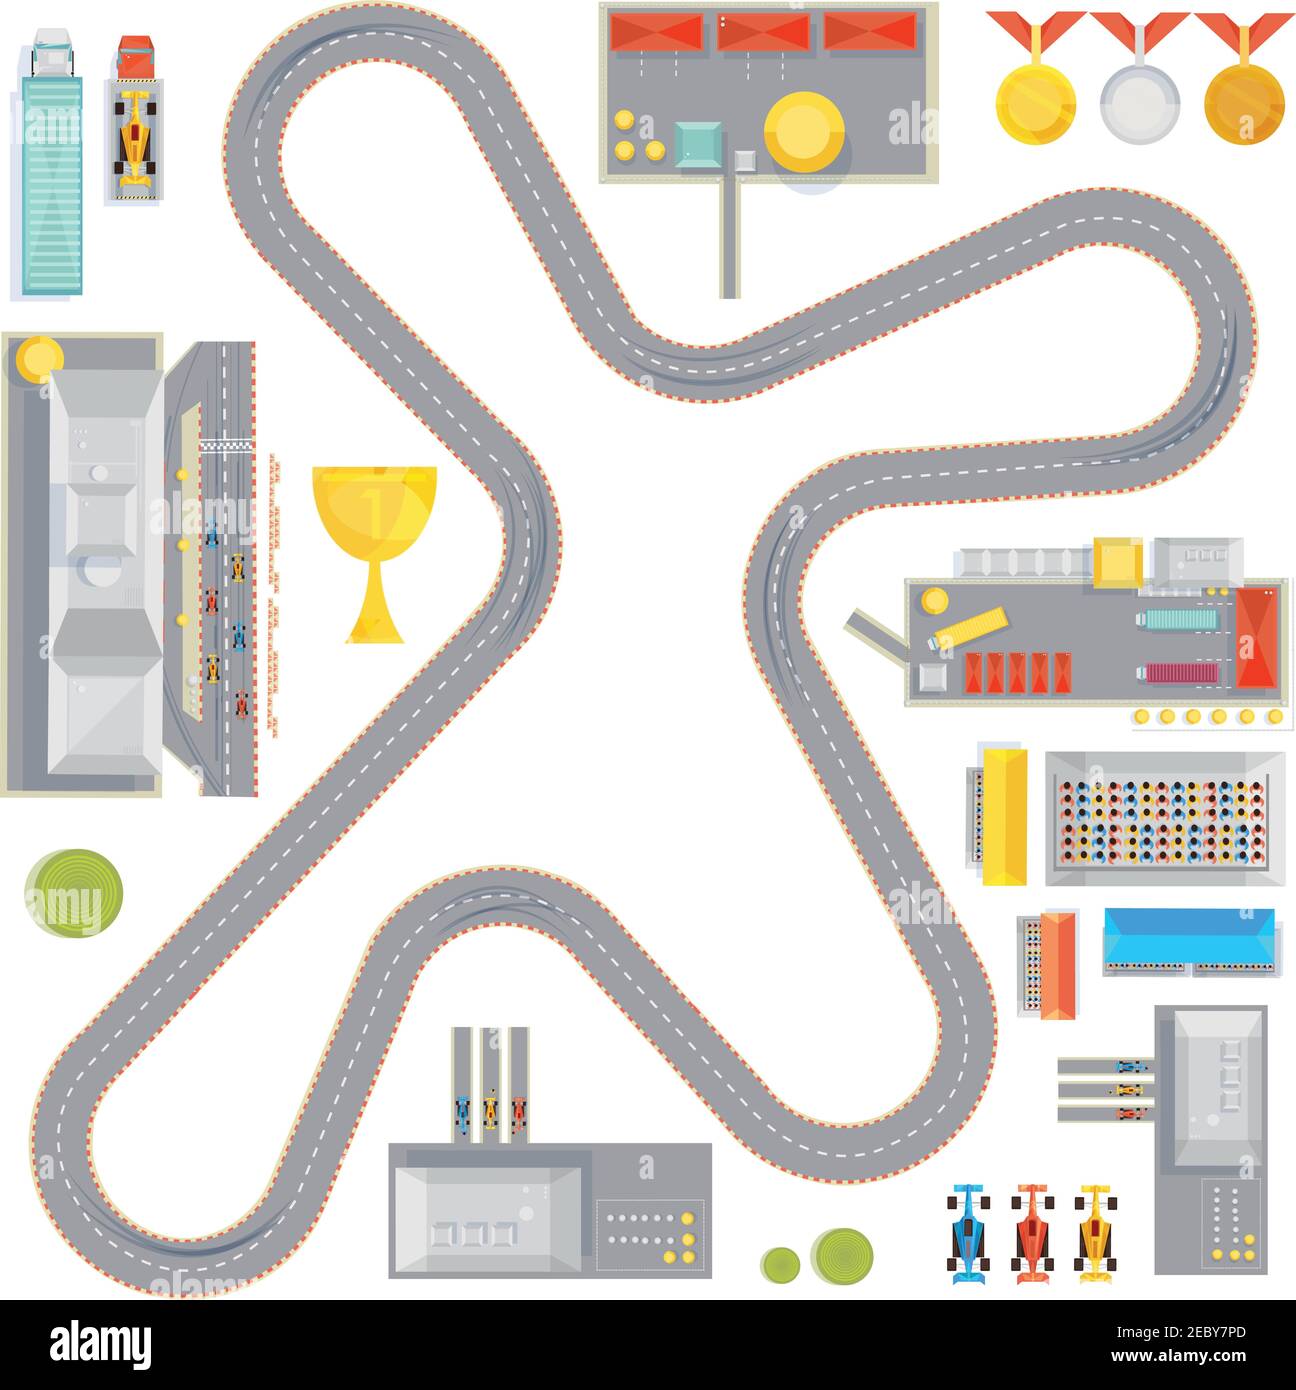 Composition with curvy racing track garages service stations and race car images cup and medals icons vector illustration Stock Vector